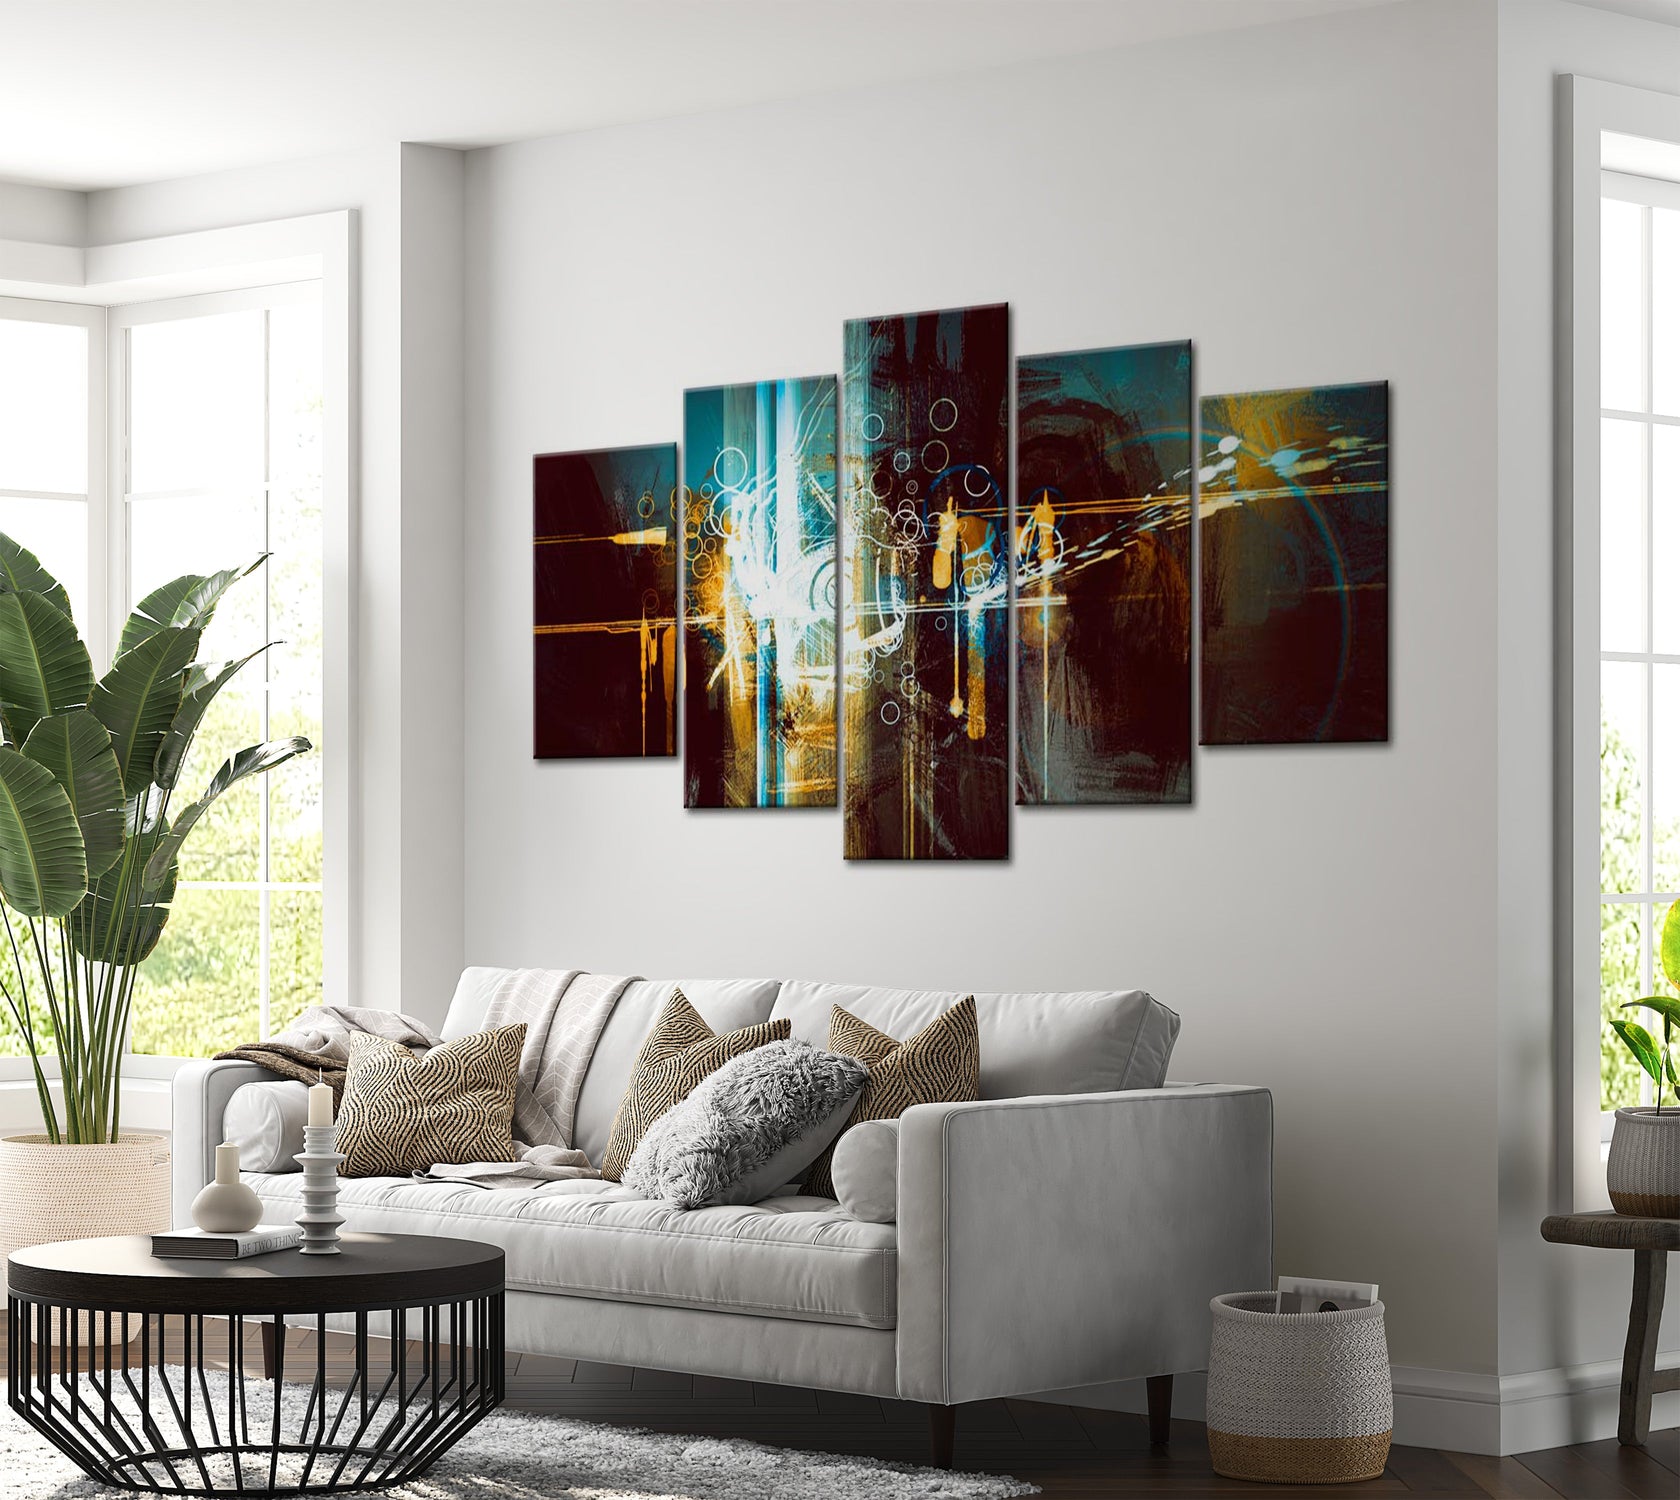 Abstract Canvas Wall Art - Stellar Chariot - 5 Pieces